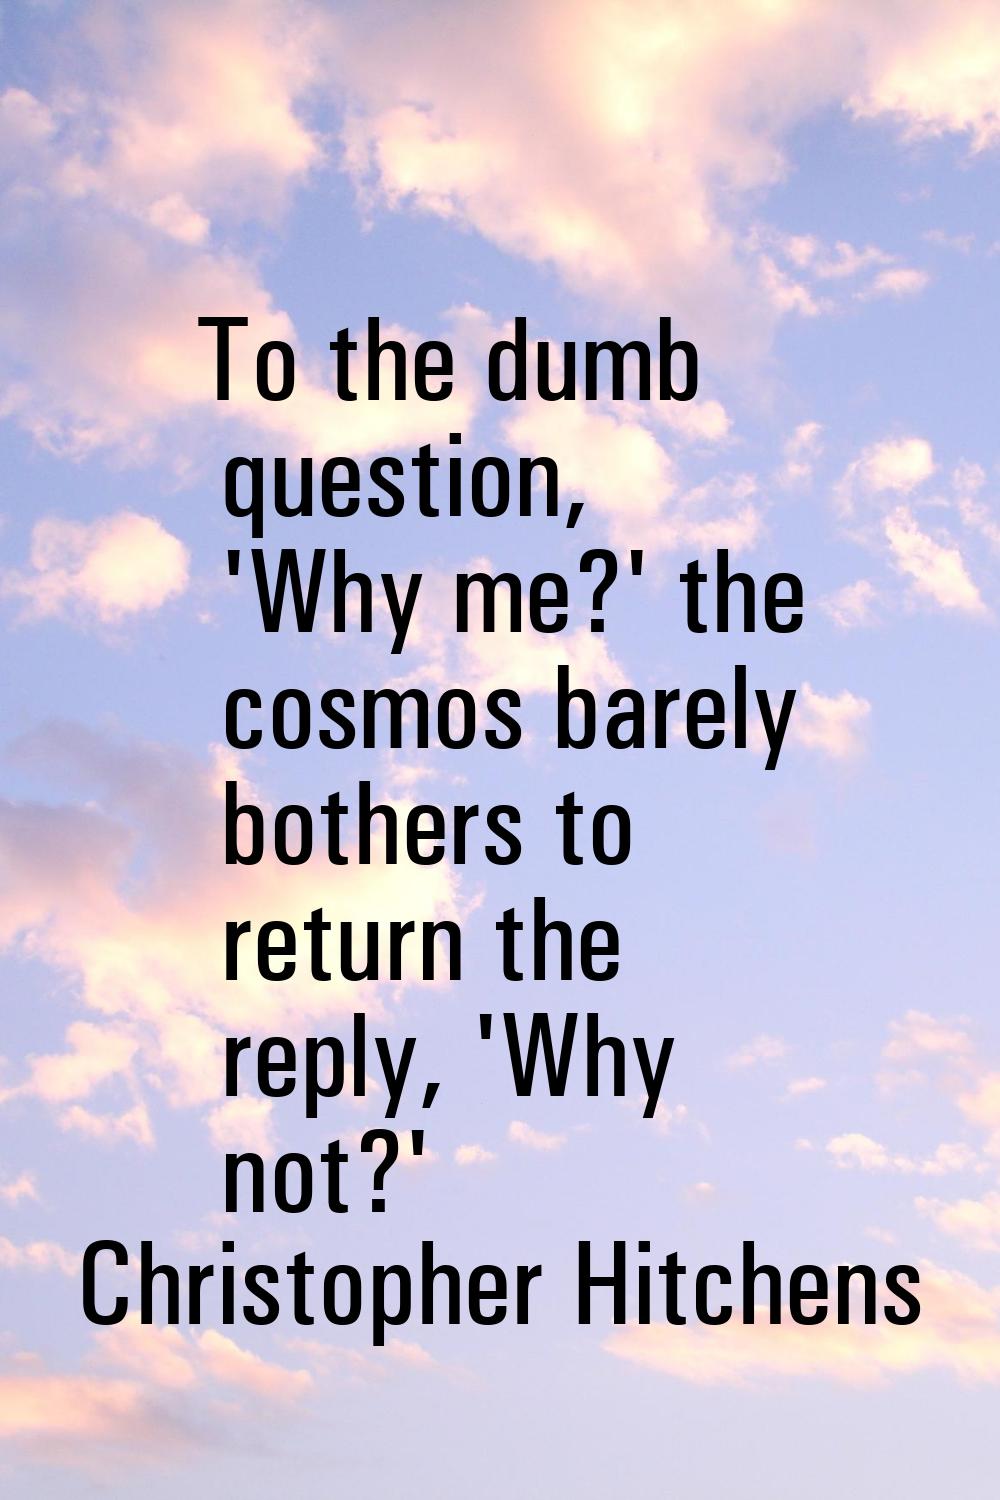 To the dumb question, 'Why me?' the cosmos barely bothers to return the reply, 'Why not?'